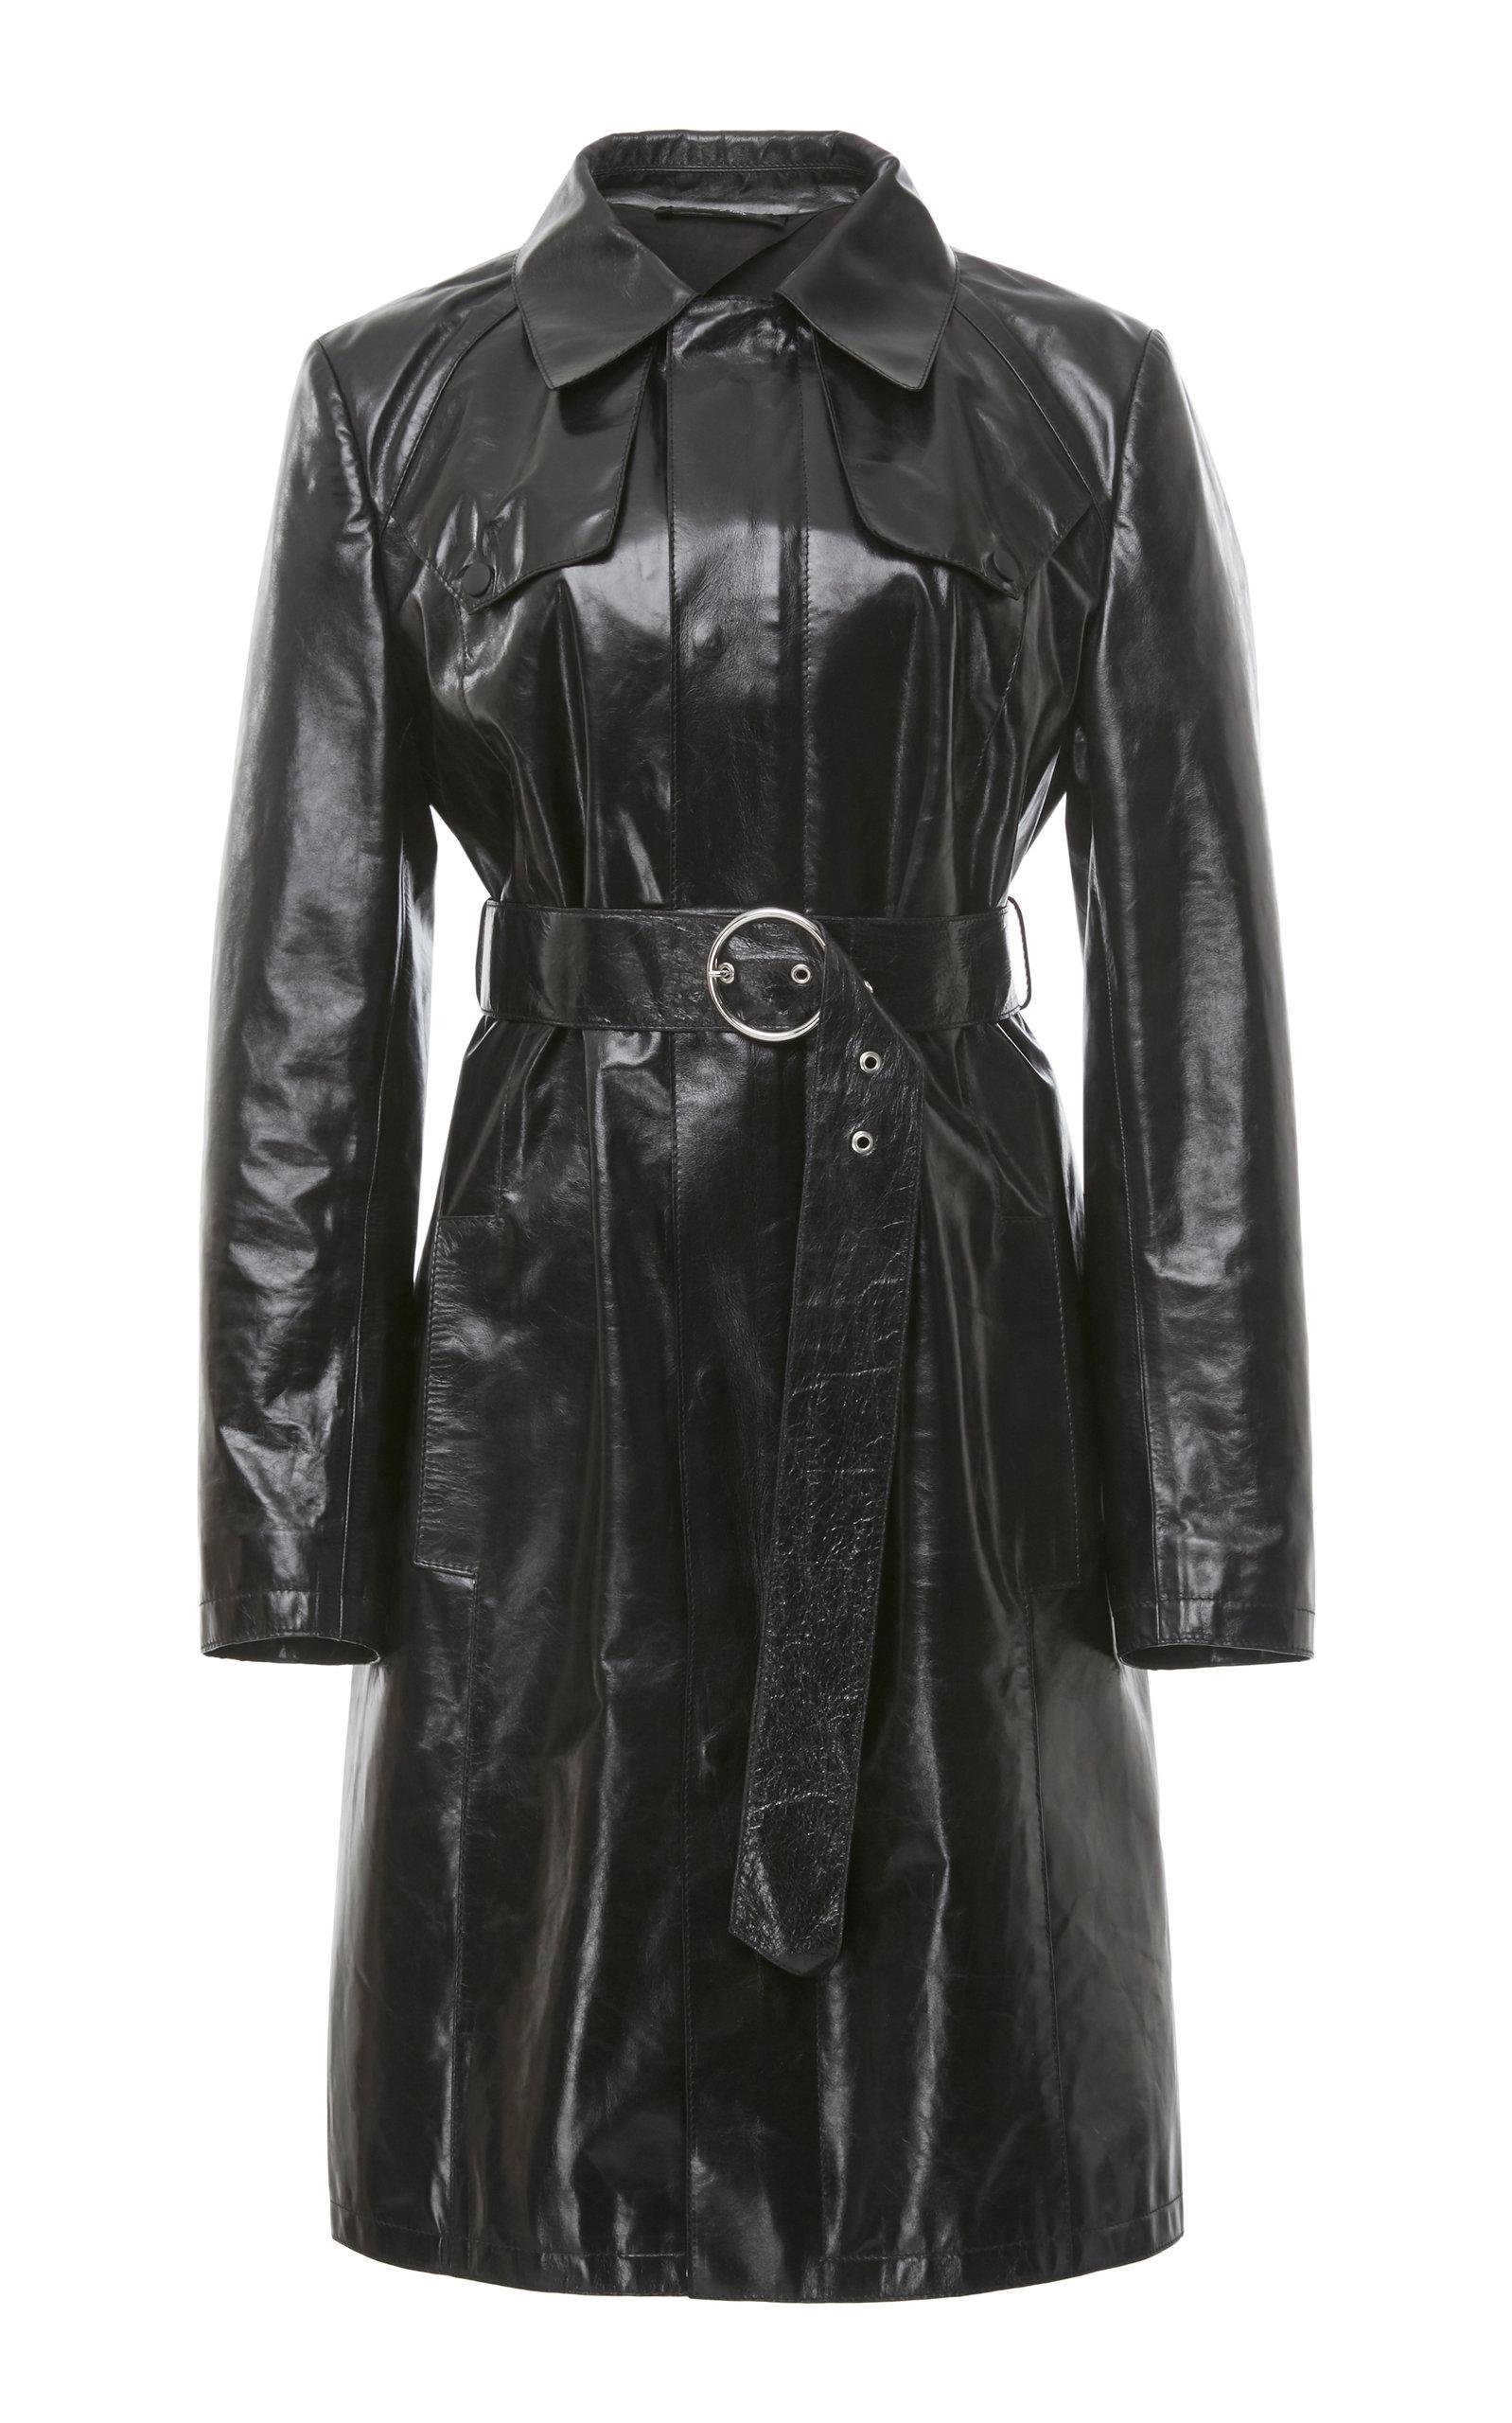 Maison Margiela Belted Leather Trench Coat in Black - Lyst